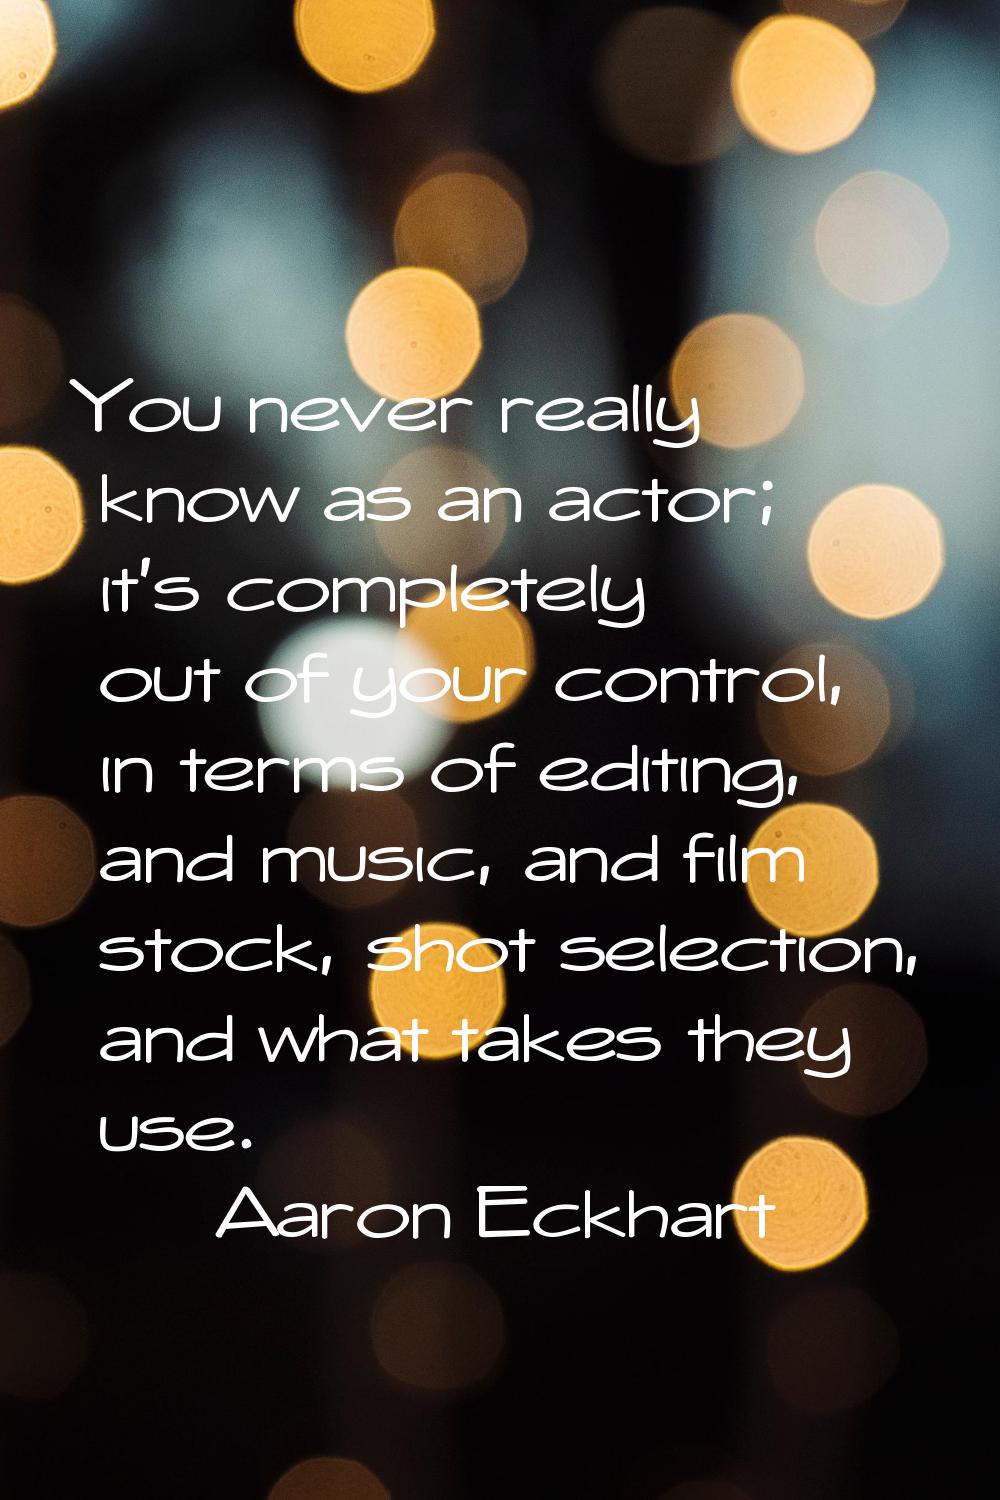 You never really know as an actor; it's completely out of your control, in terms of editing, and mu